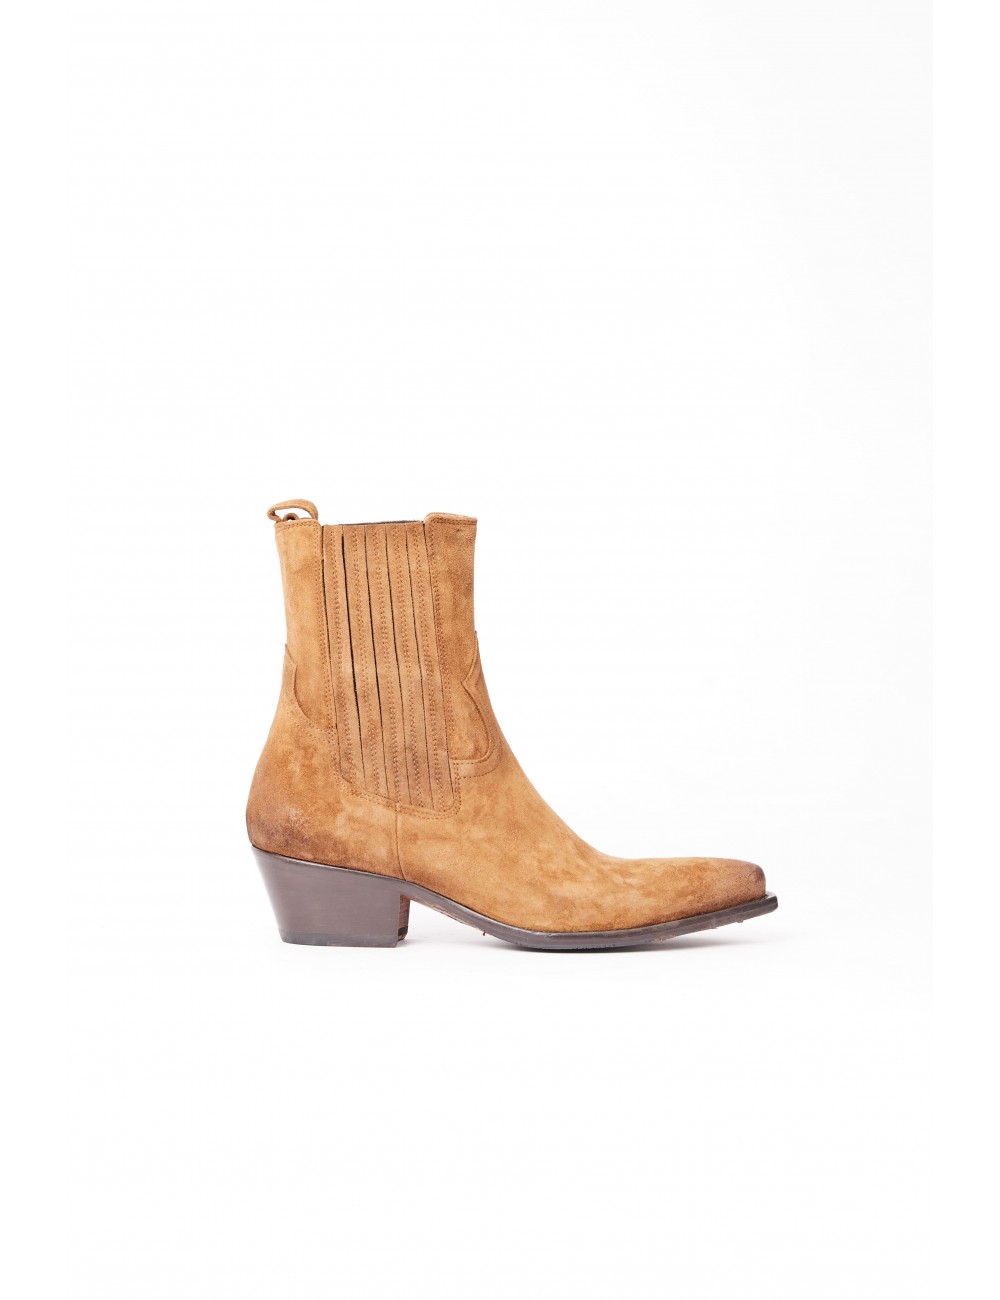 Women's boot in natural...